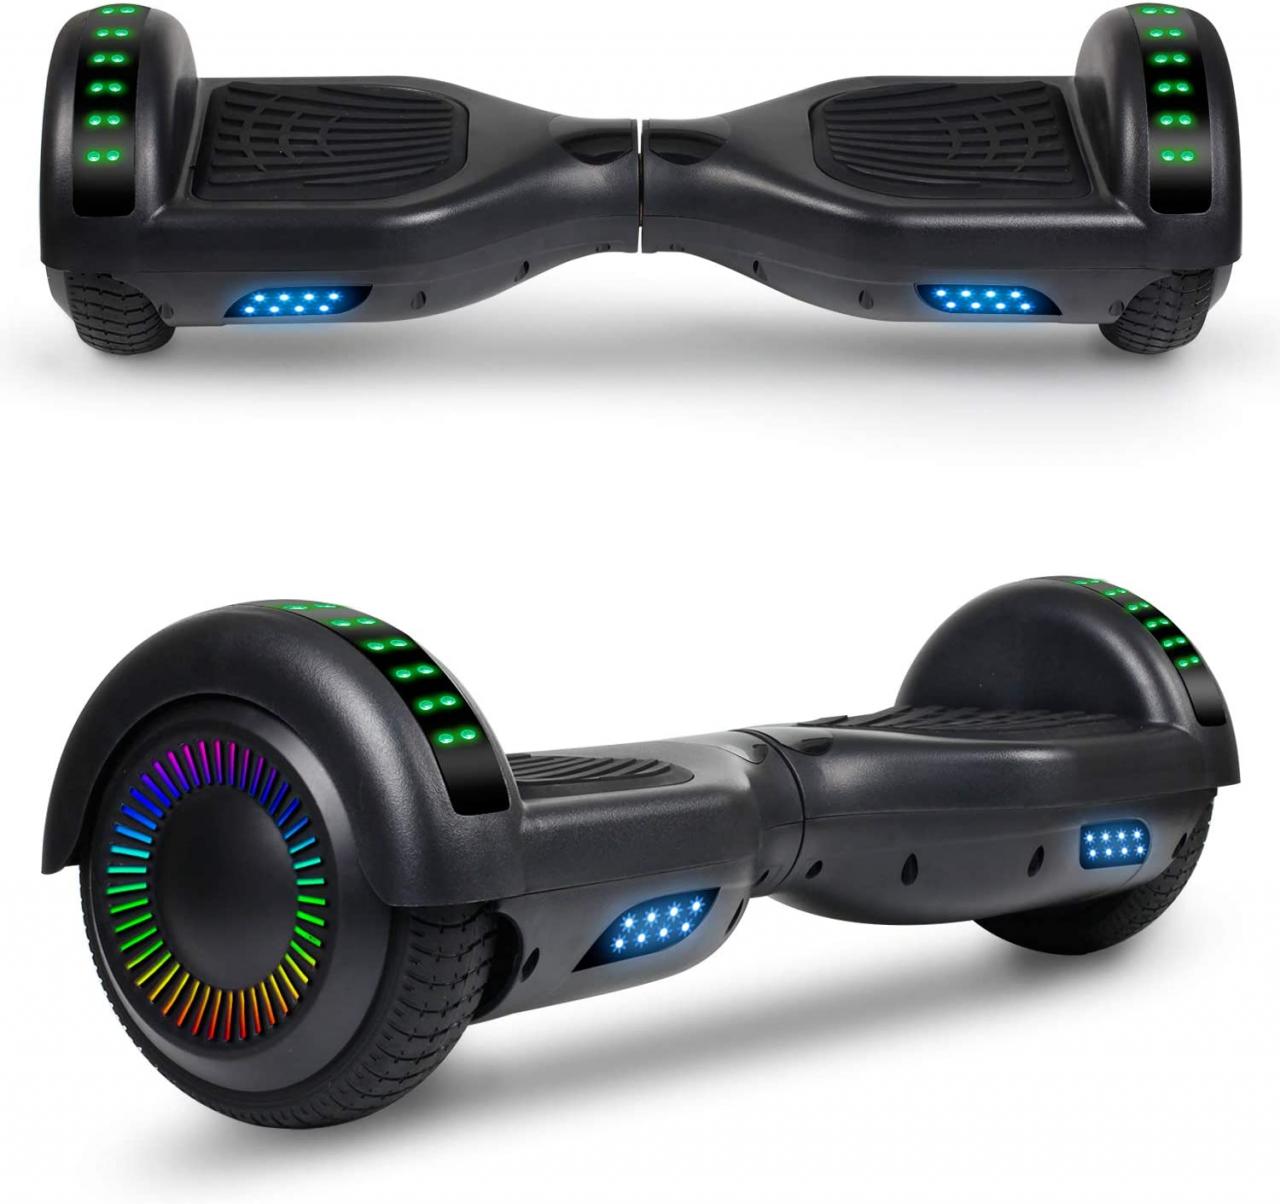 Buy UNI-SUN 6.5 Bluetooth Hoverboard for Kids, Self Balancing Hoverboard  with Bluetooth and LED Lights for Adults, Kids Bluetooth Hover Board Online  in Vietnam. B07M5GV51Y